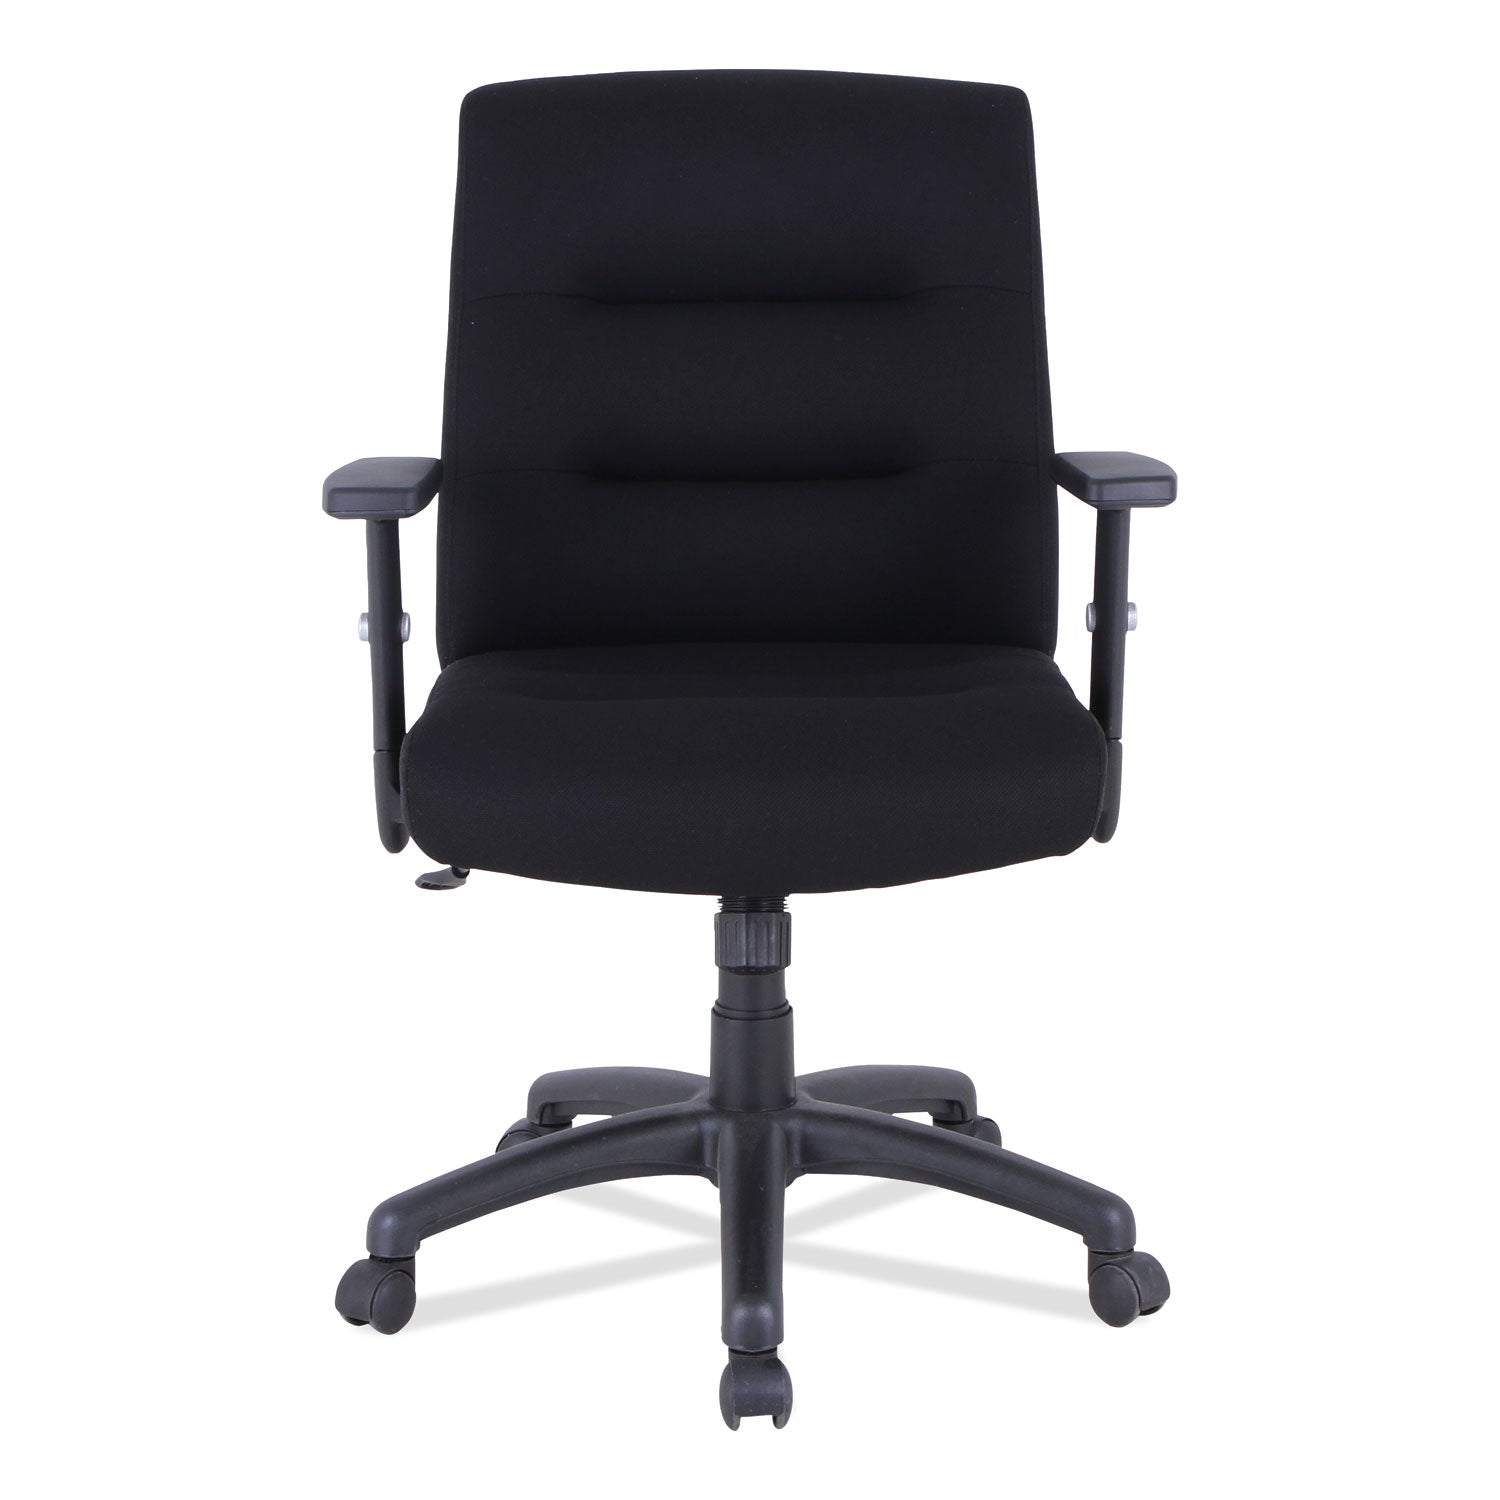 alera-kesson-series-petite-office-chair-supports-up-to-300-lb-1771-to-2165-seat-height-black_aleks4010 - 6